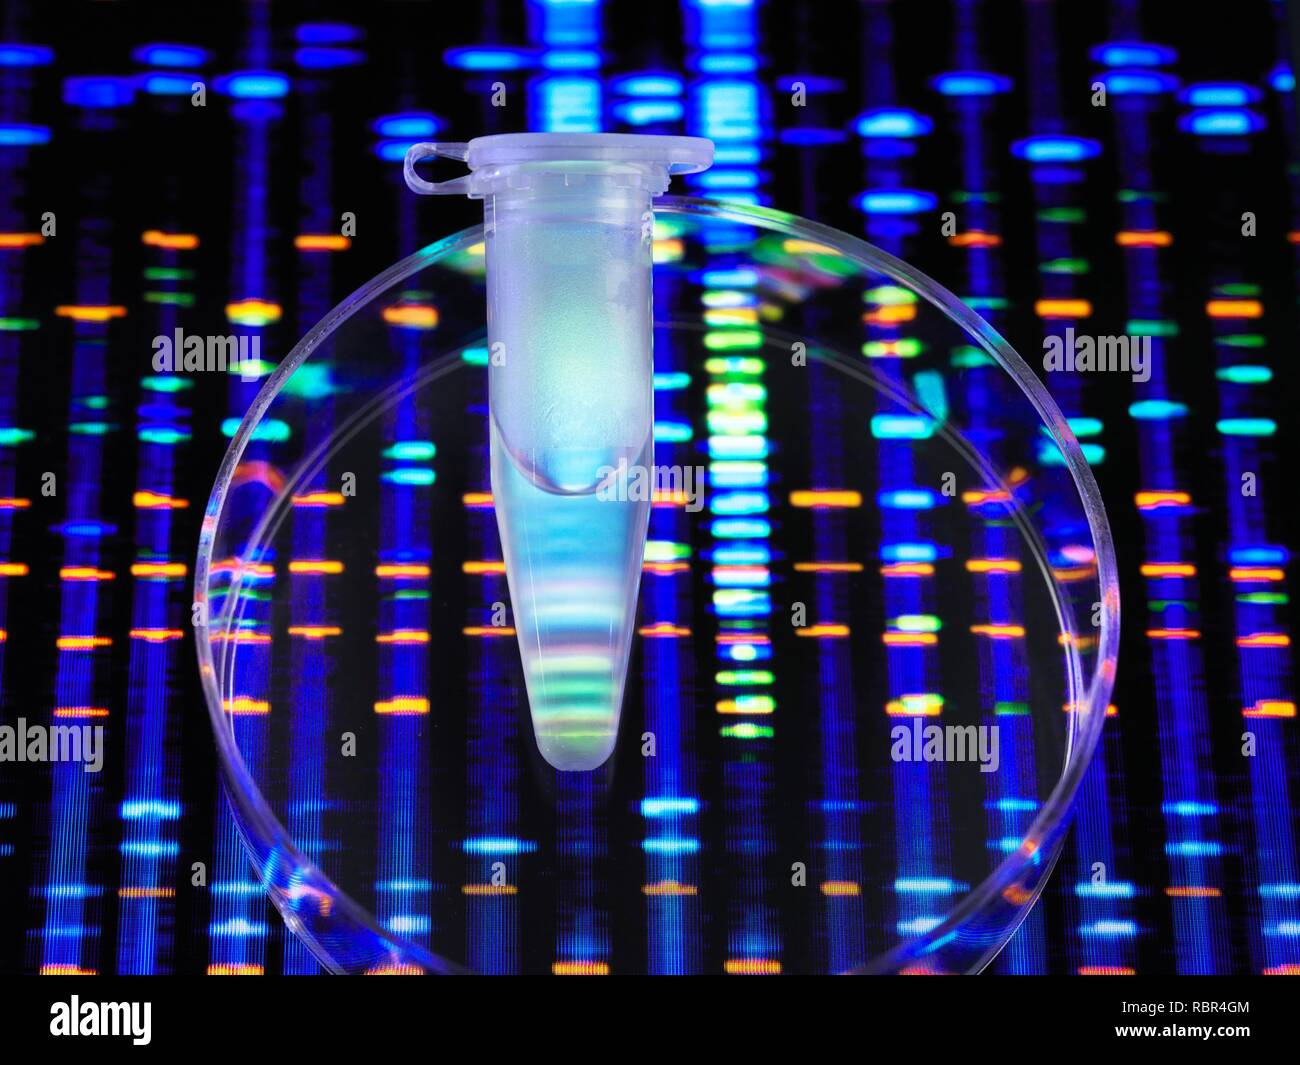 Genetic Research. A eppendorf tube containing a DNA (deoxyribonucleic acid) sample with the DNA profile in the background. Stock Photo